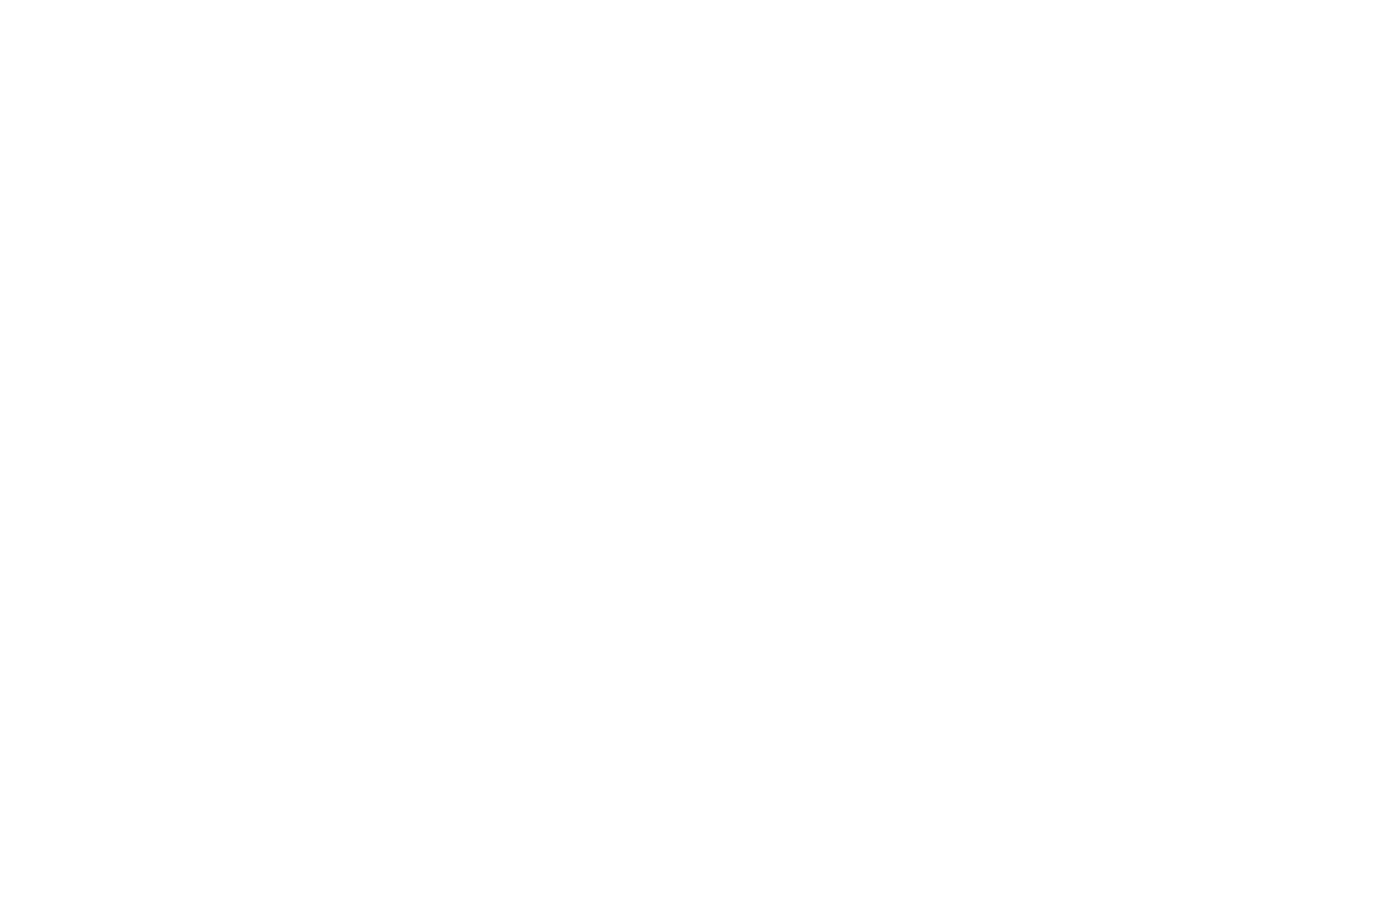 Laureate Gardens - Henley-On-Thames - Exclusive homes designed for the over 55s